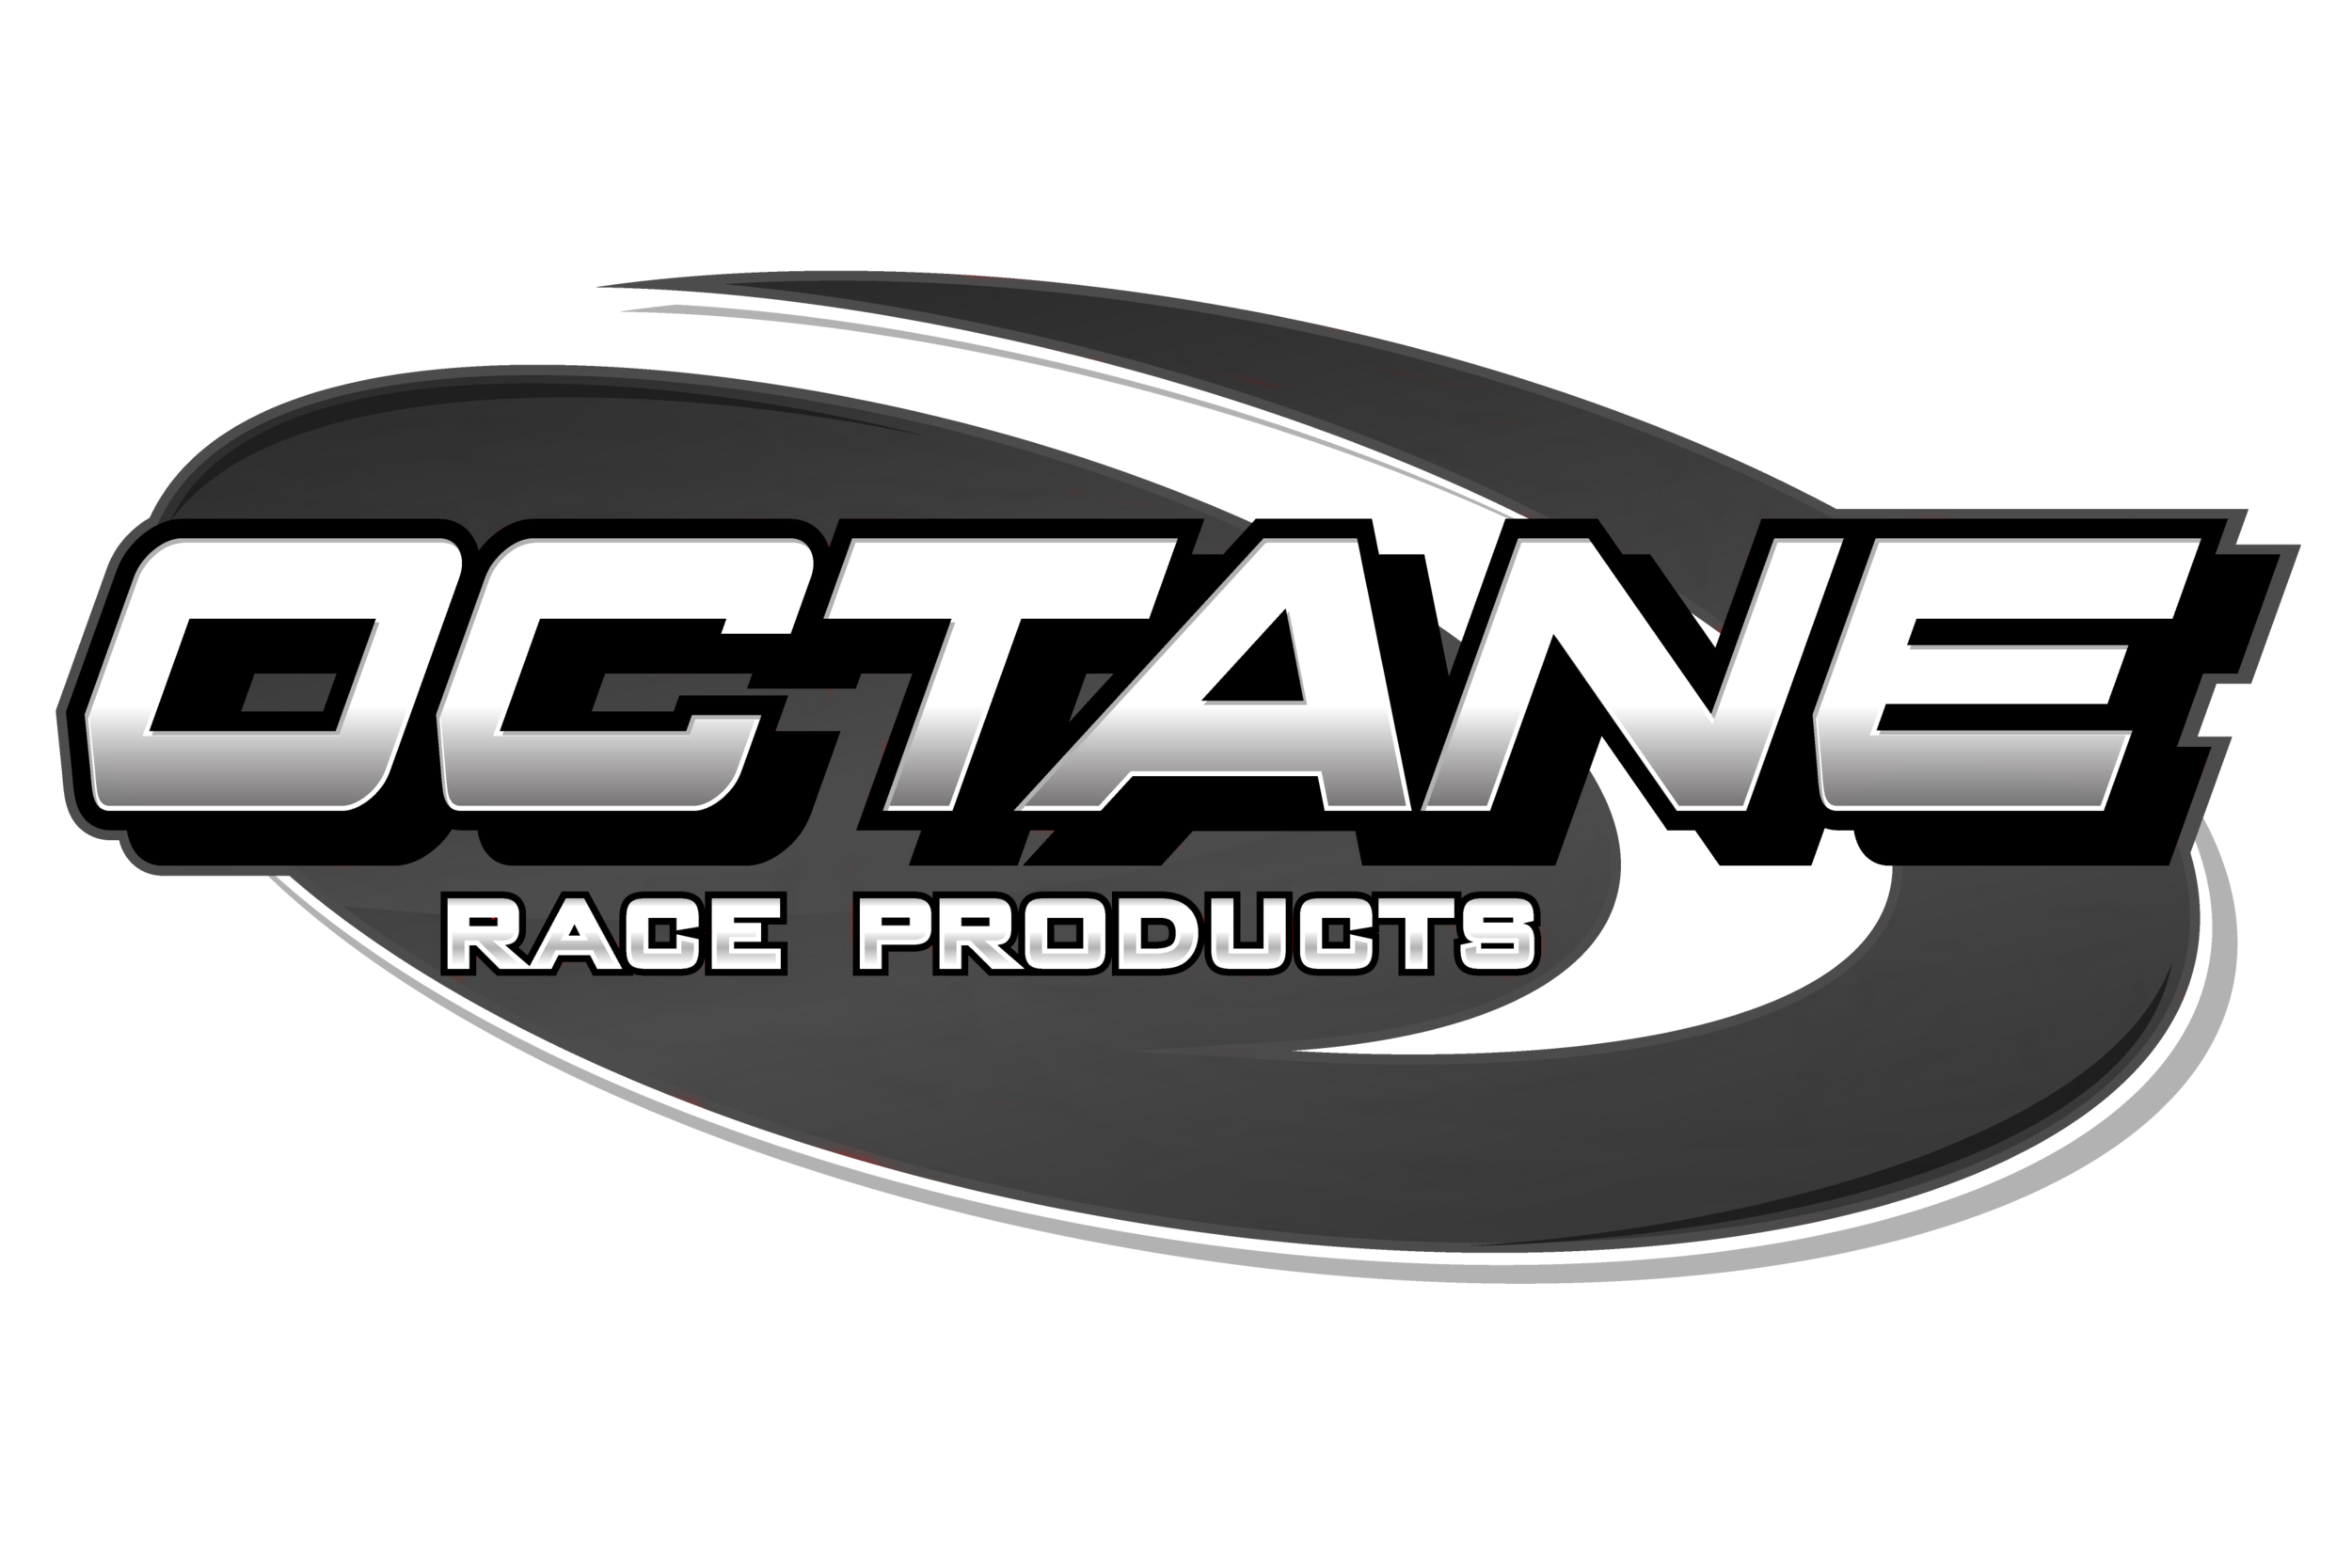 Octane Race Products charcoal.png